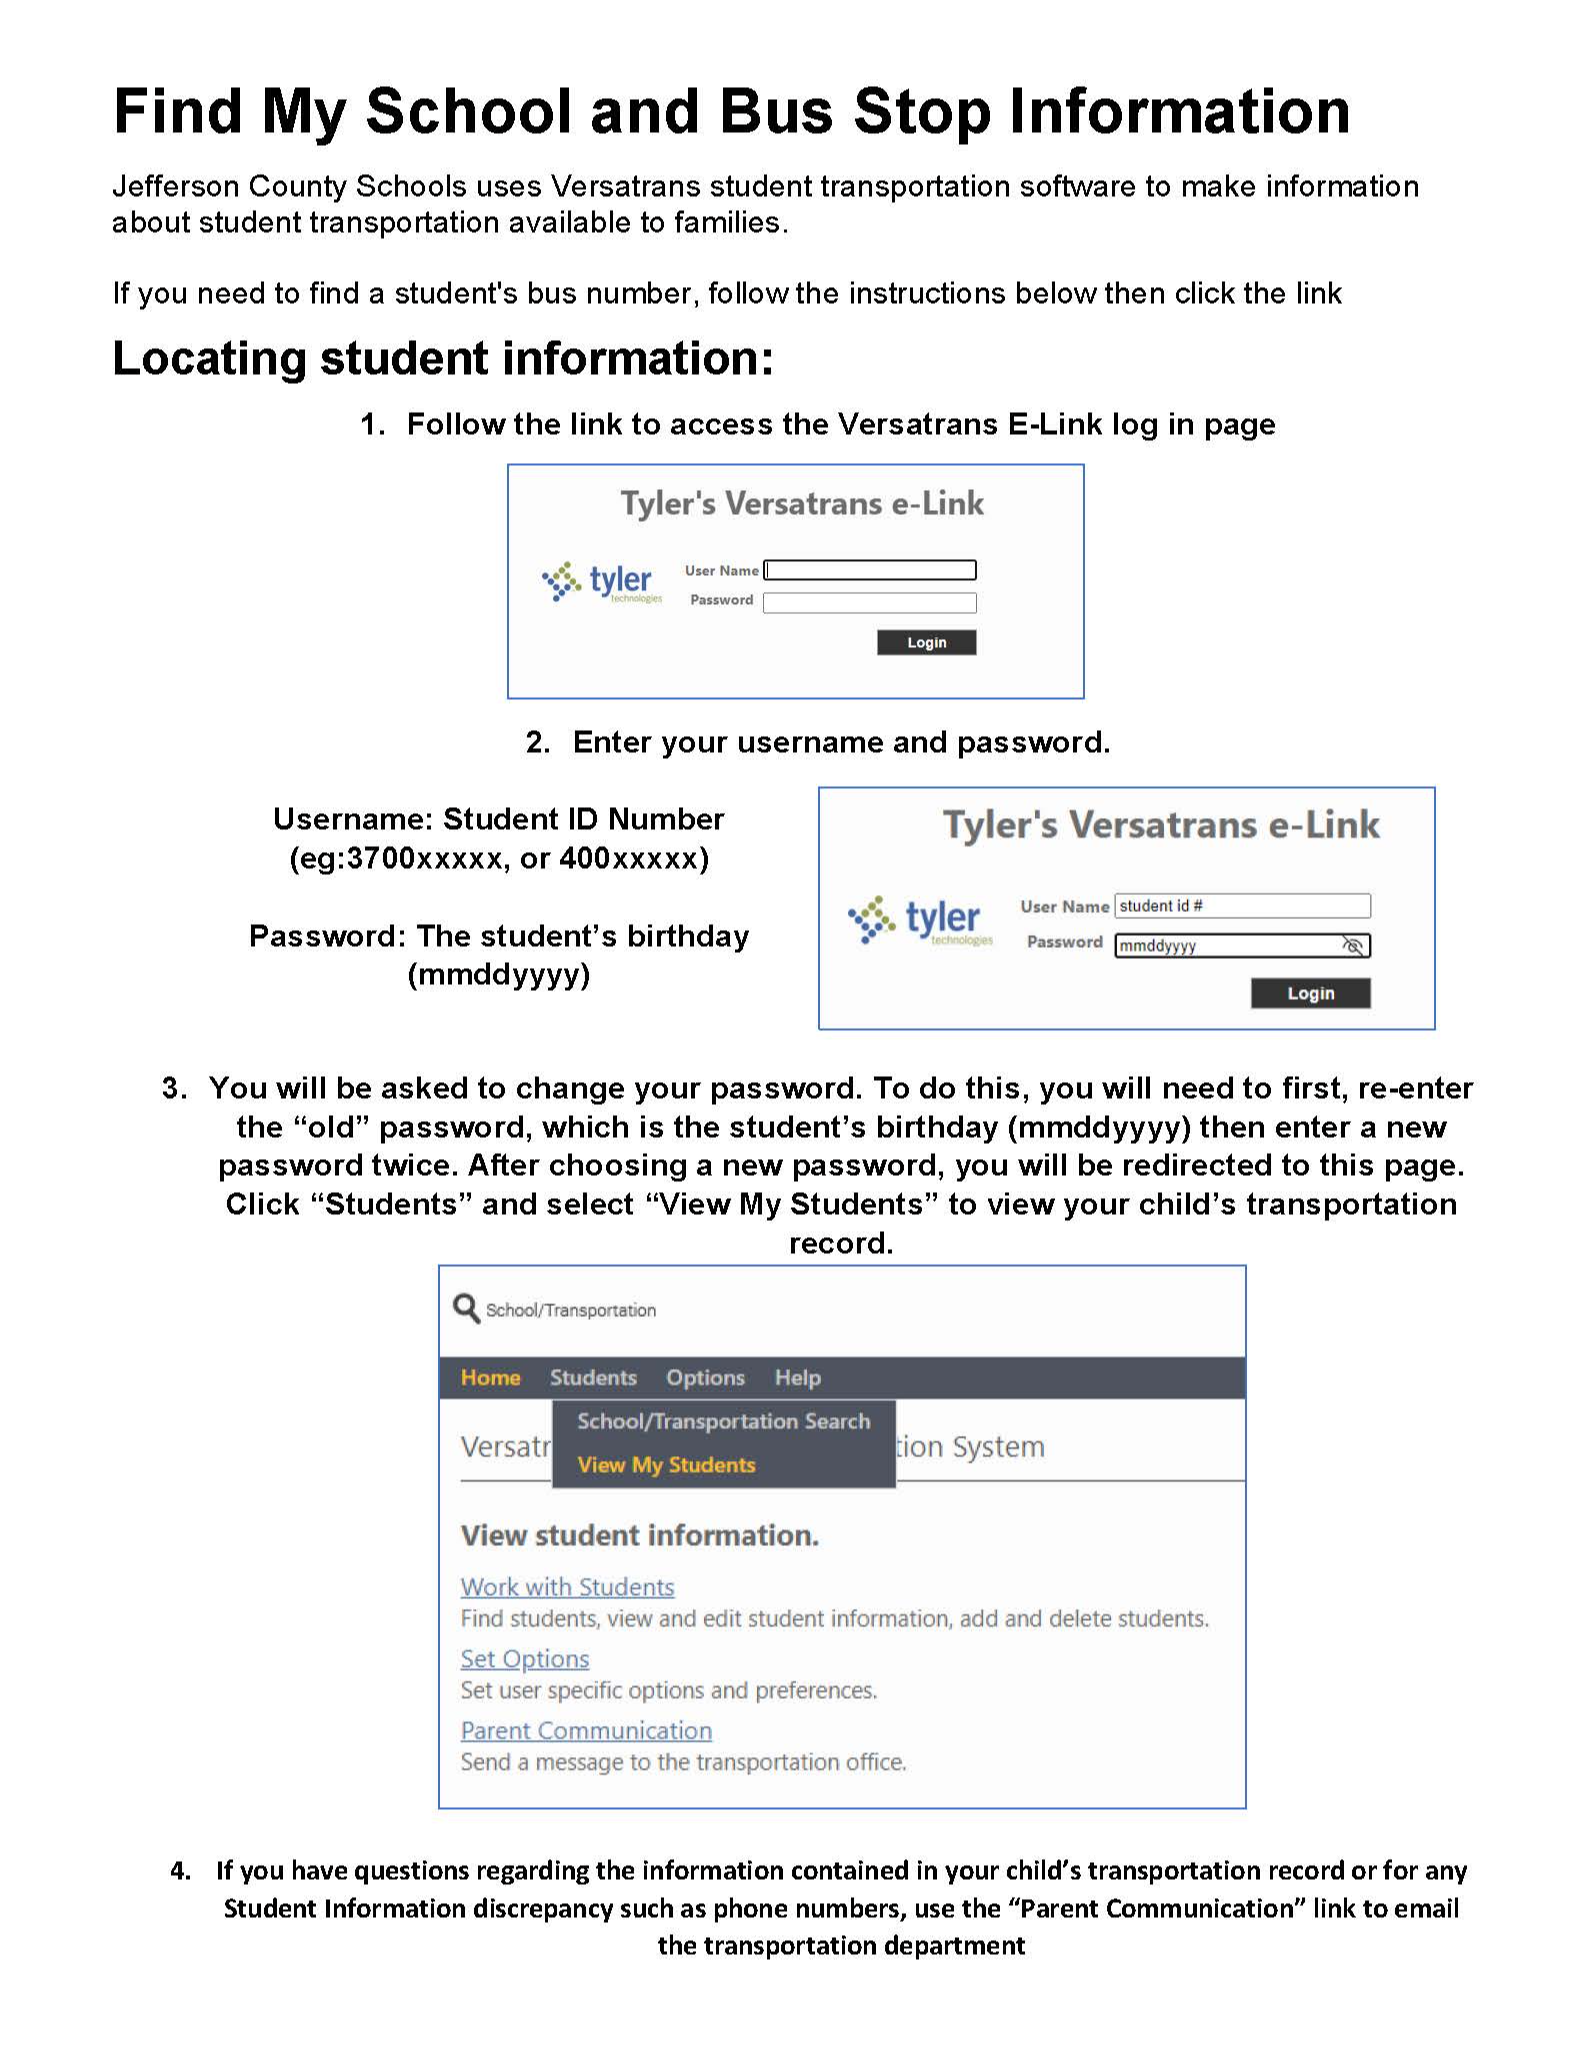 Follow the link to access the Versitrans e-Link login page